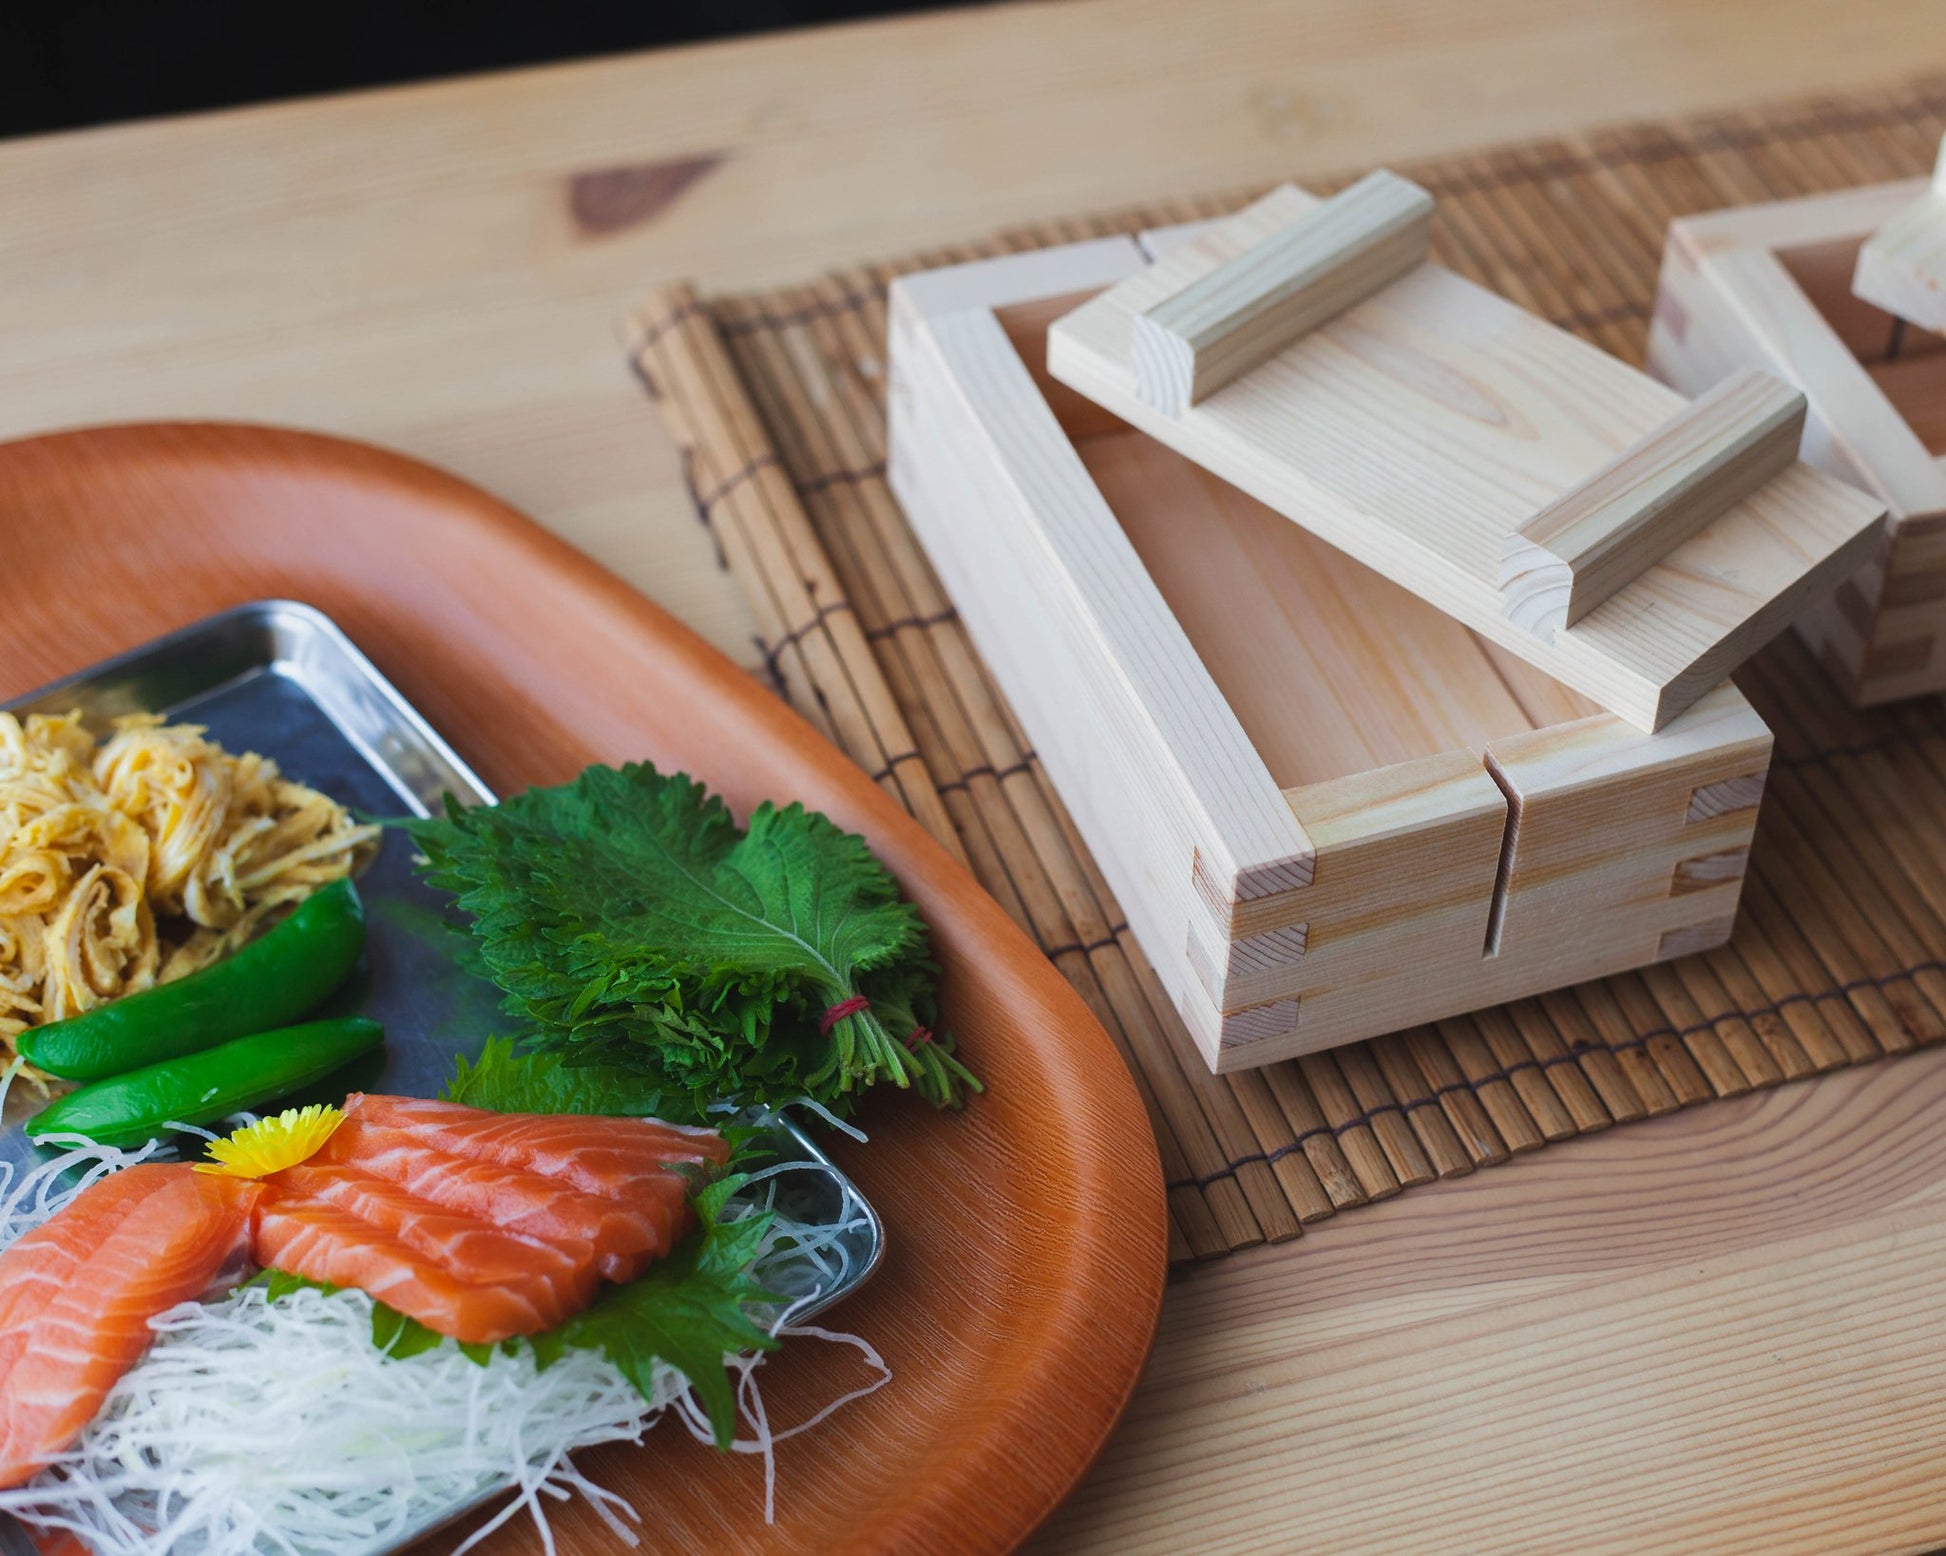 Wooden sushi mold